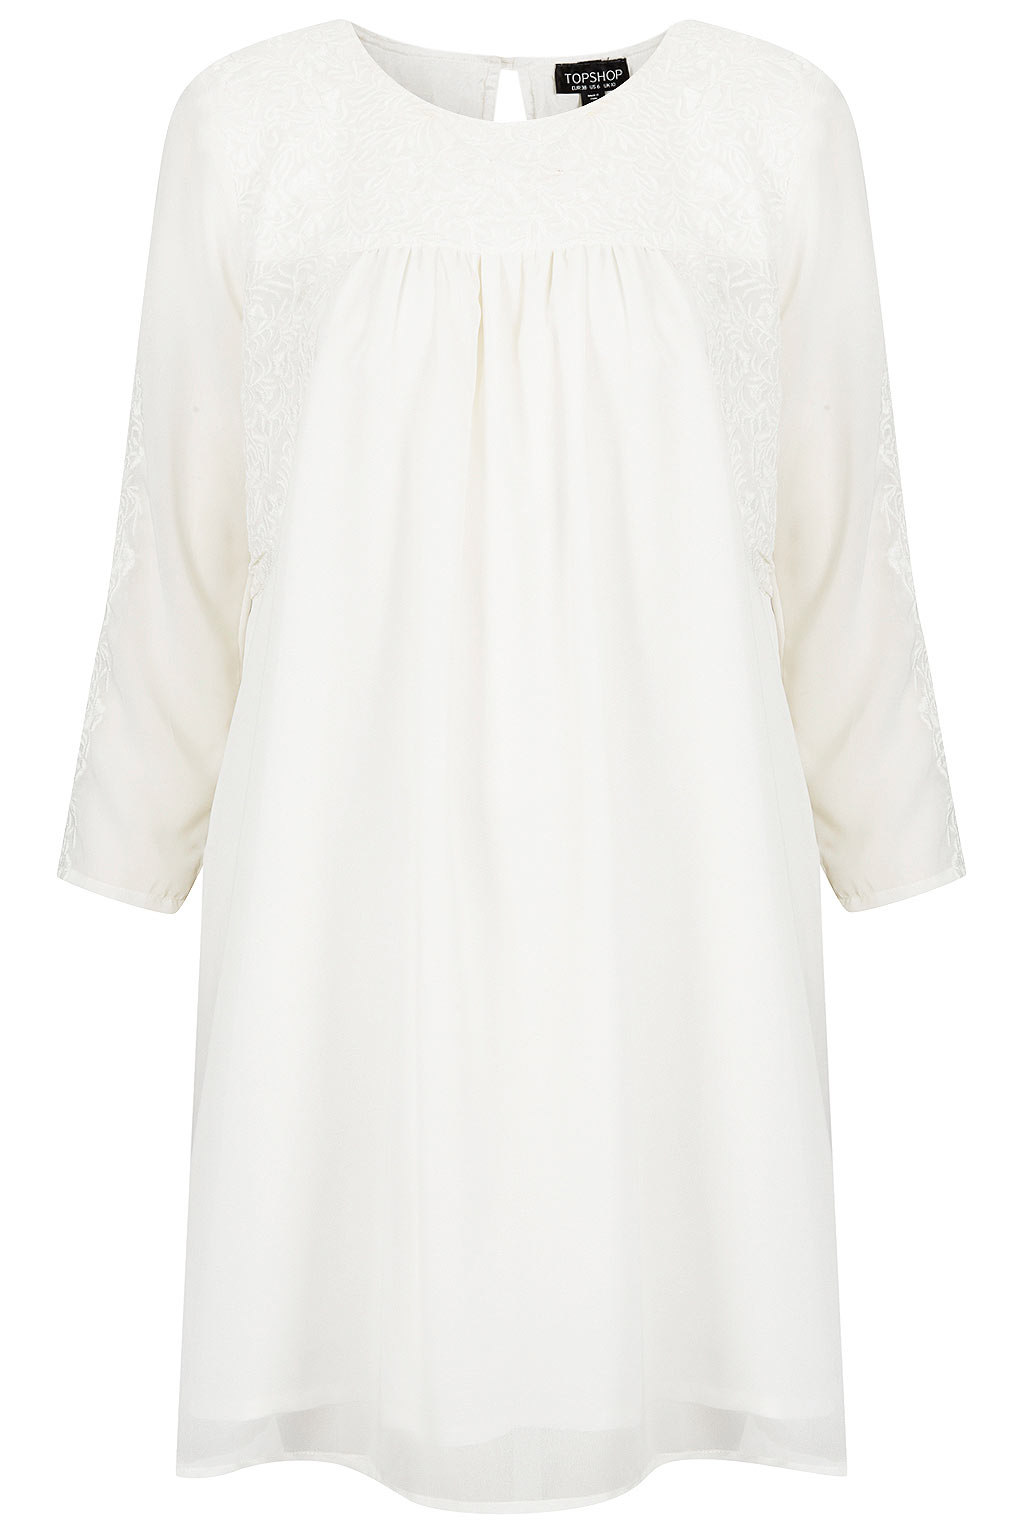 Topshop Embroidered Tunic Dress in Beige (cream) | Lyst